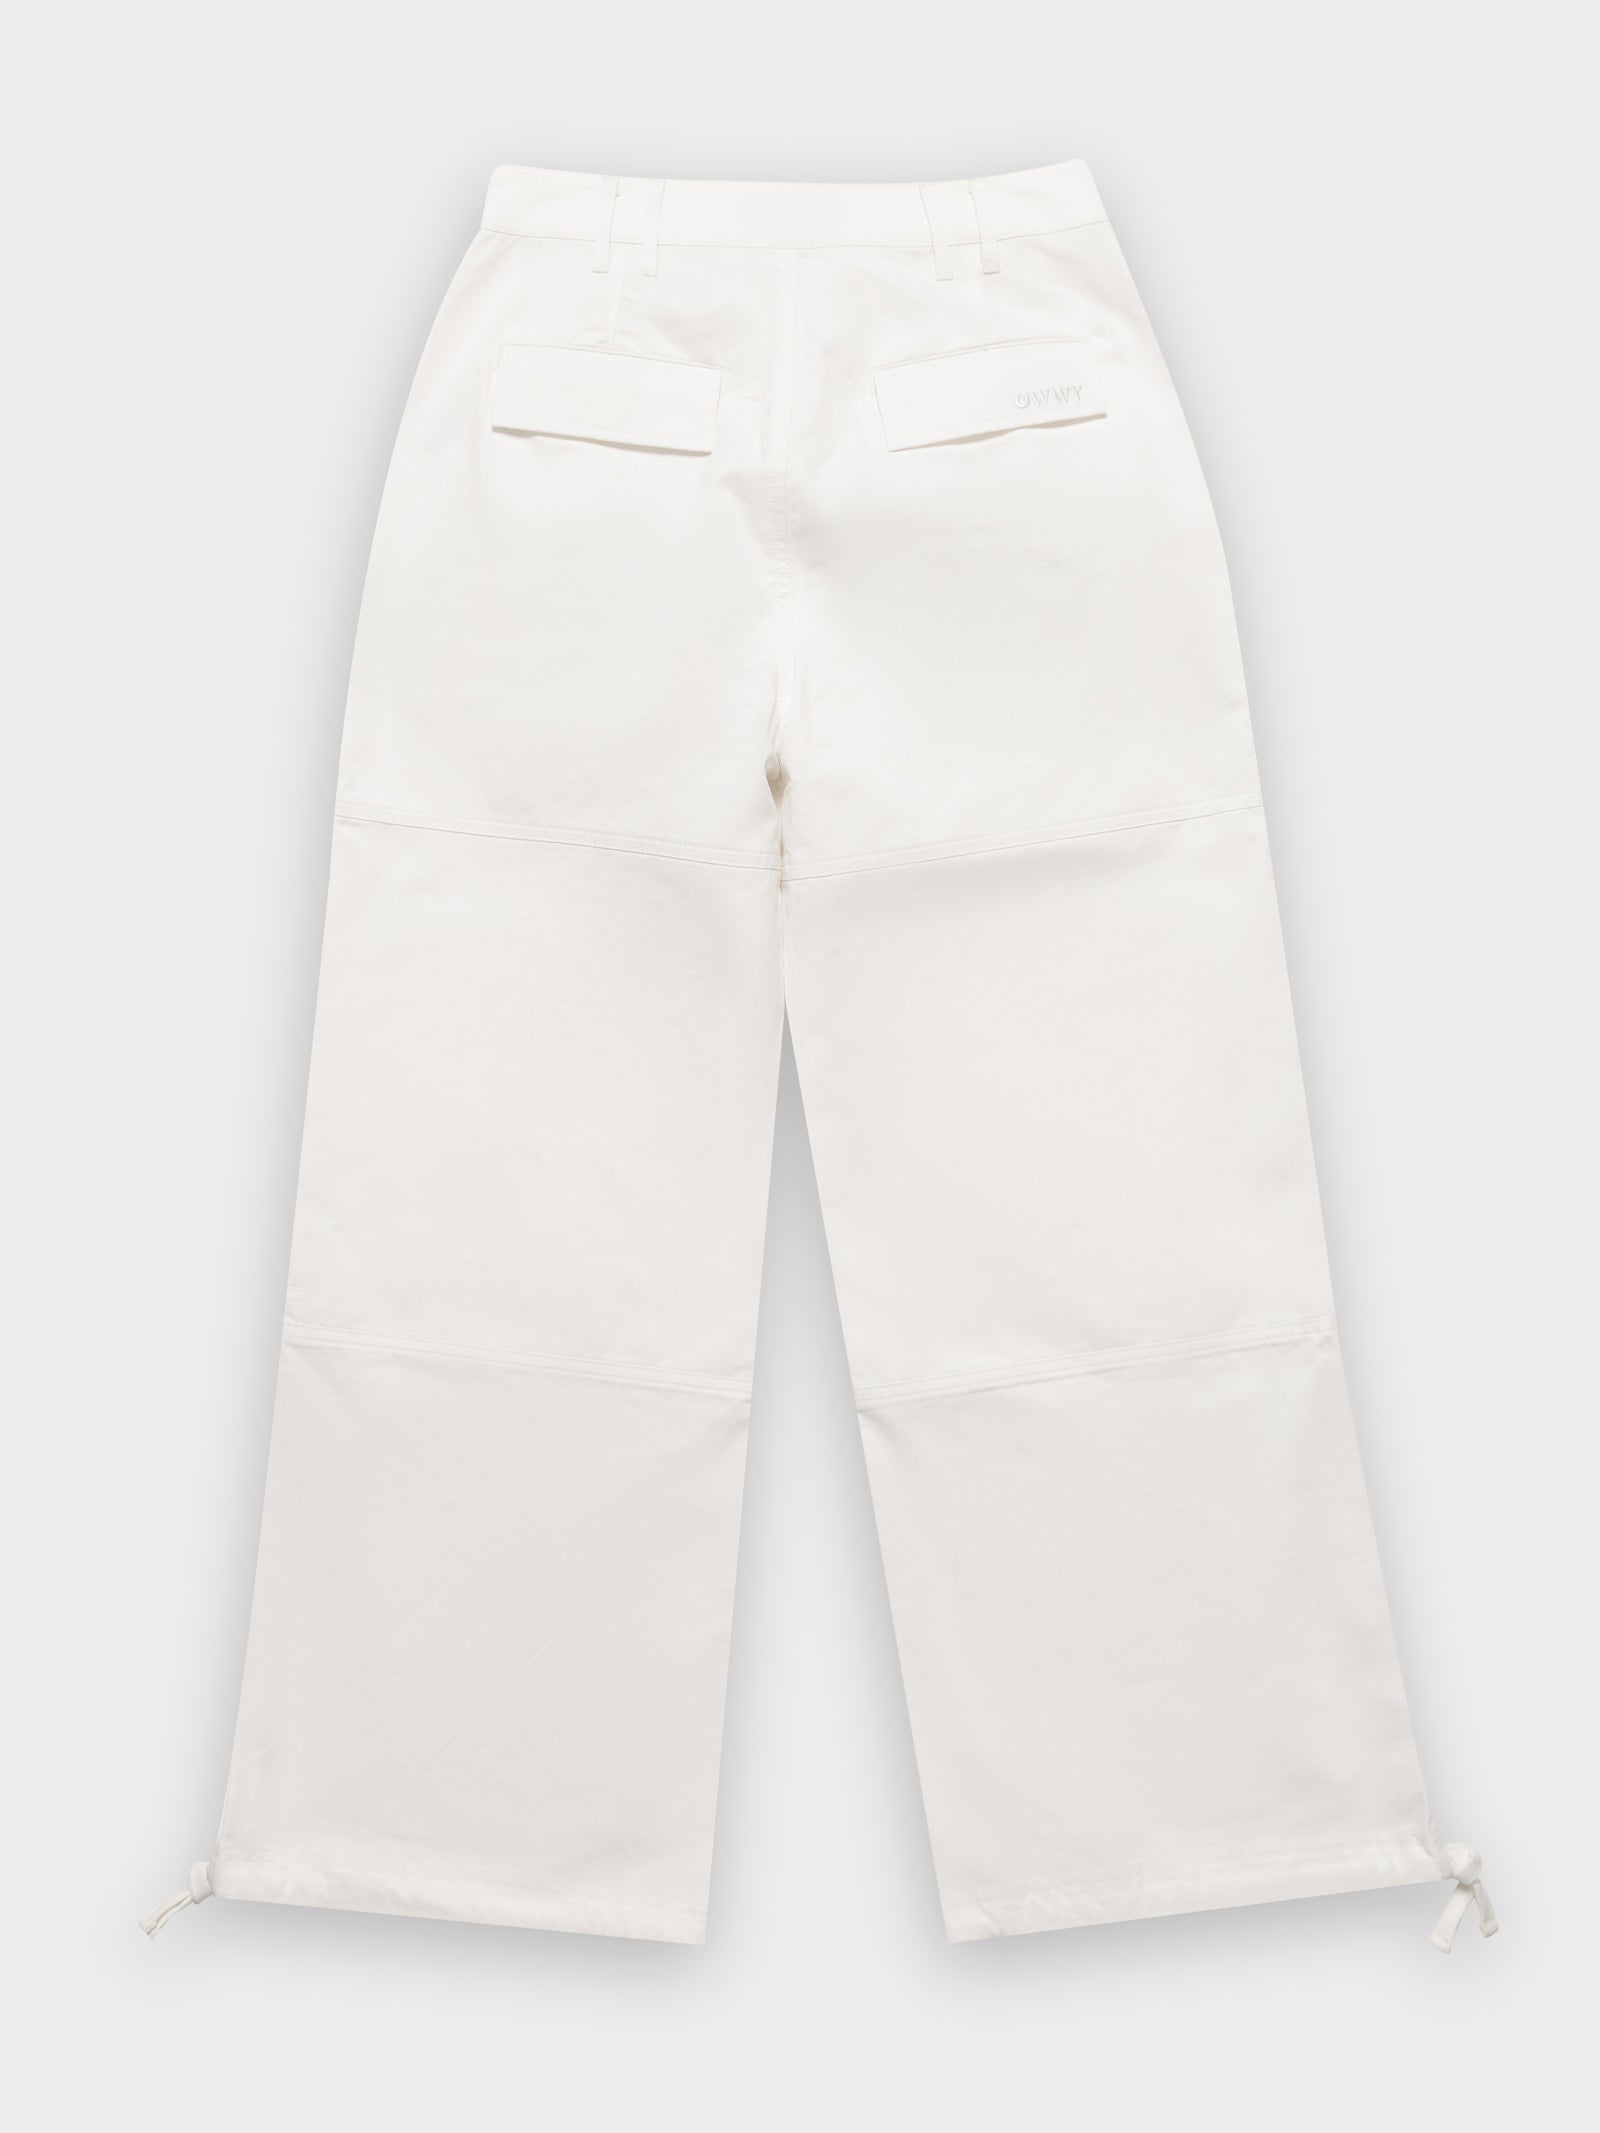 Long Stride Cargo Pants in White